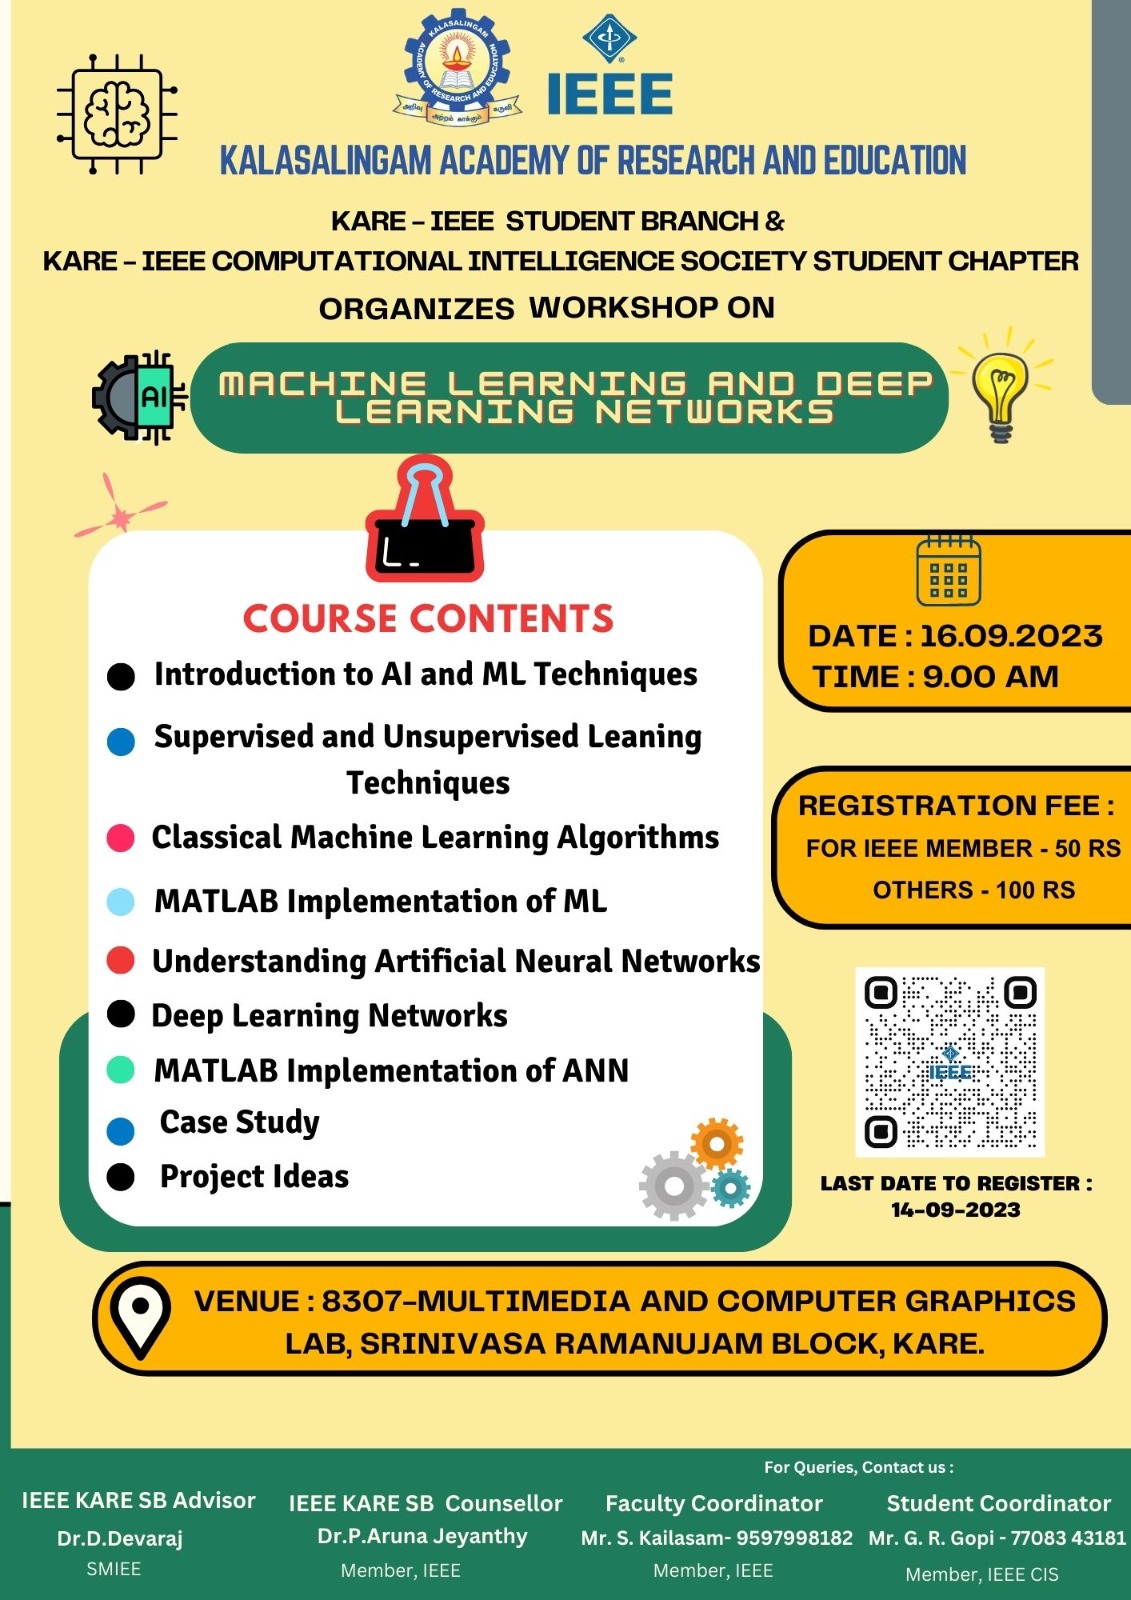 One day IEEE Workshop on Machine Learning and Deep Learning Networks 2023